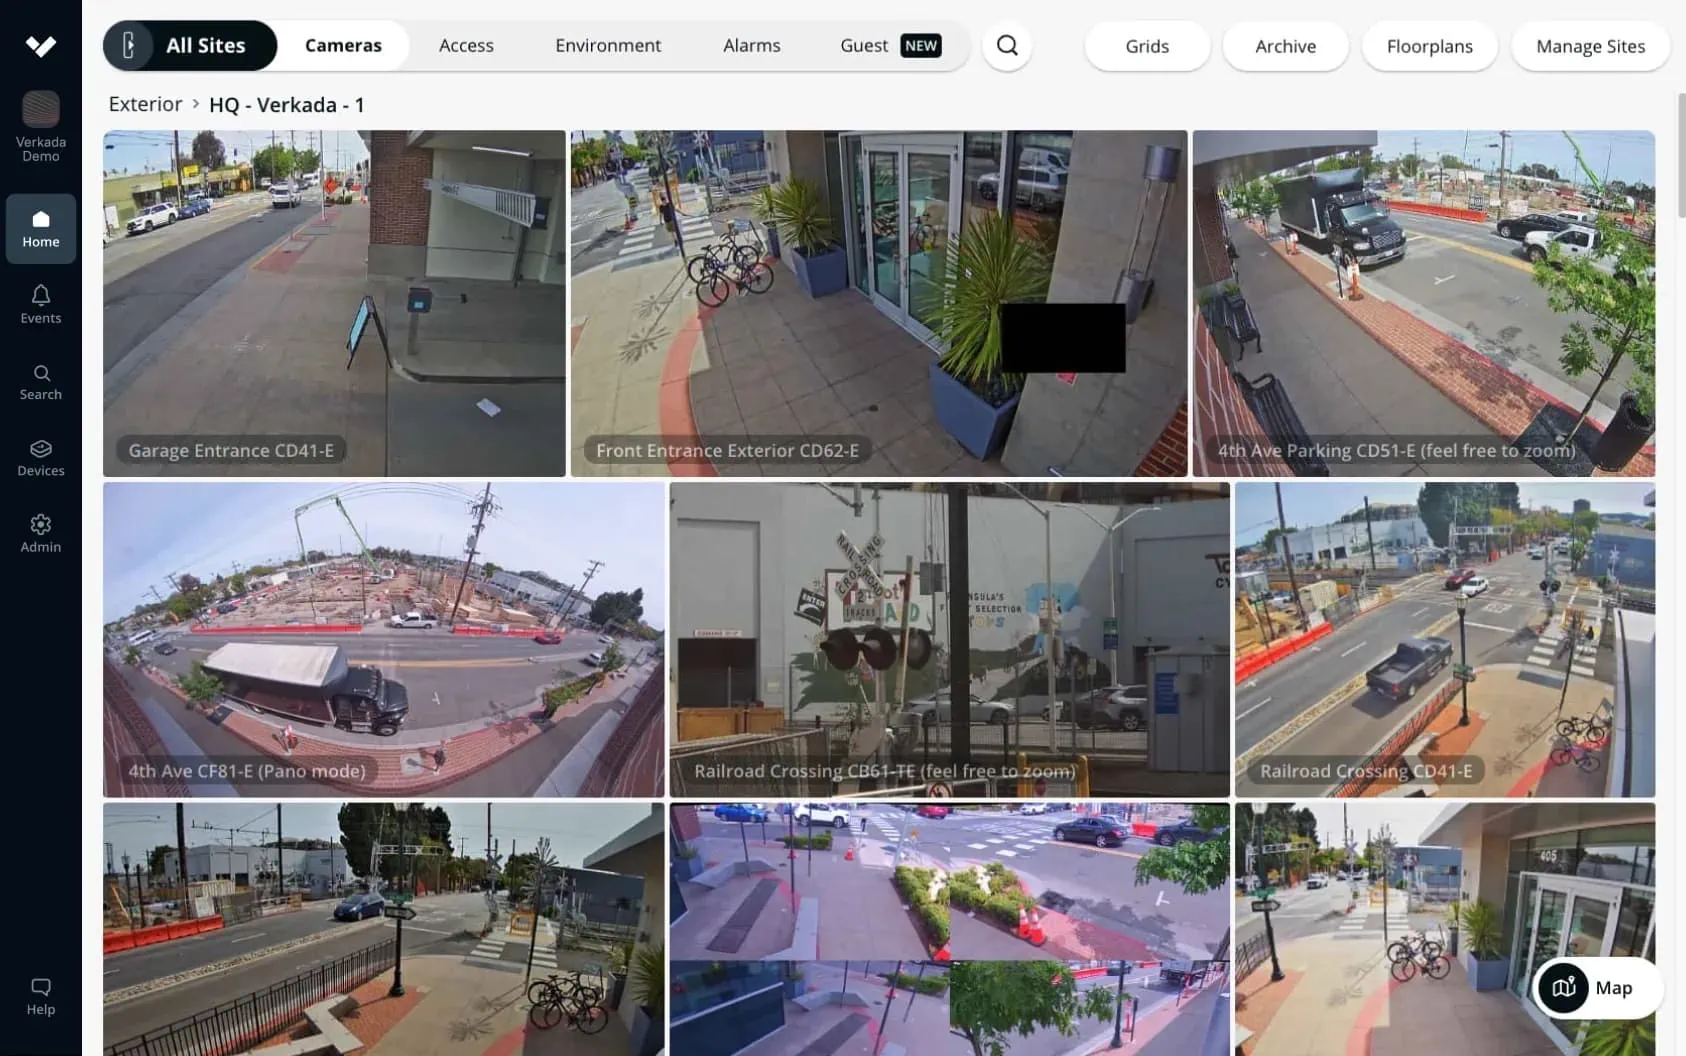 Command interface displaying footage from security cameras of a business in Pittsburgh